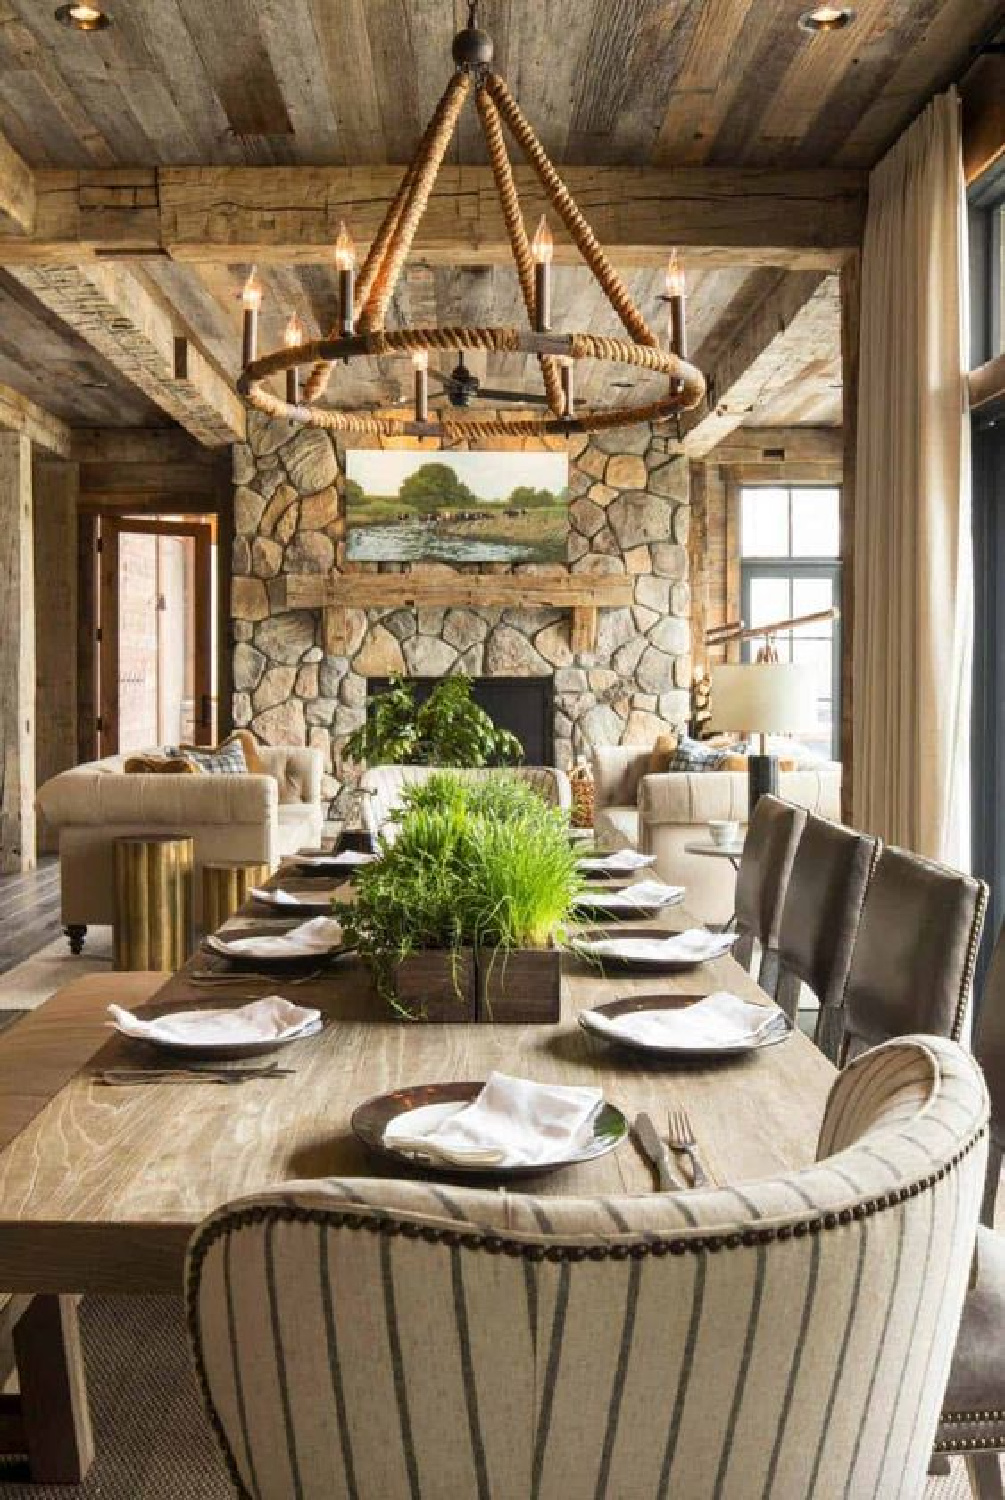 Martha O'Hara Interiors - lakehouse great room in a Wisconsin lakehouse has beautiful river rock fireplace and rustic elegance. #lakehouse #cozyretreats #rusticelegance